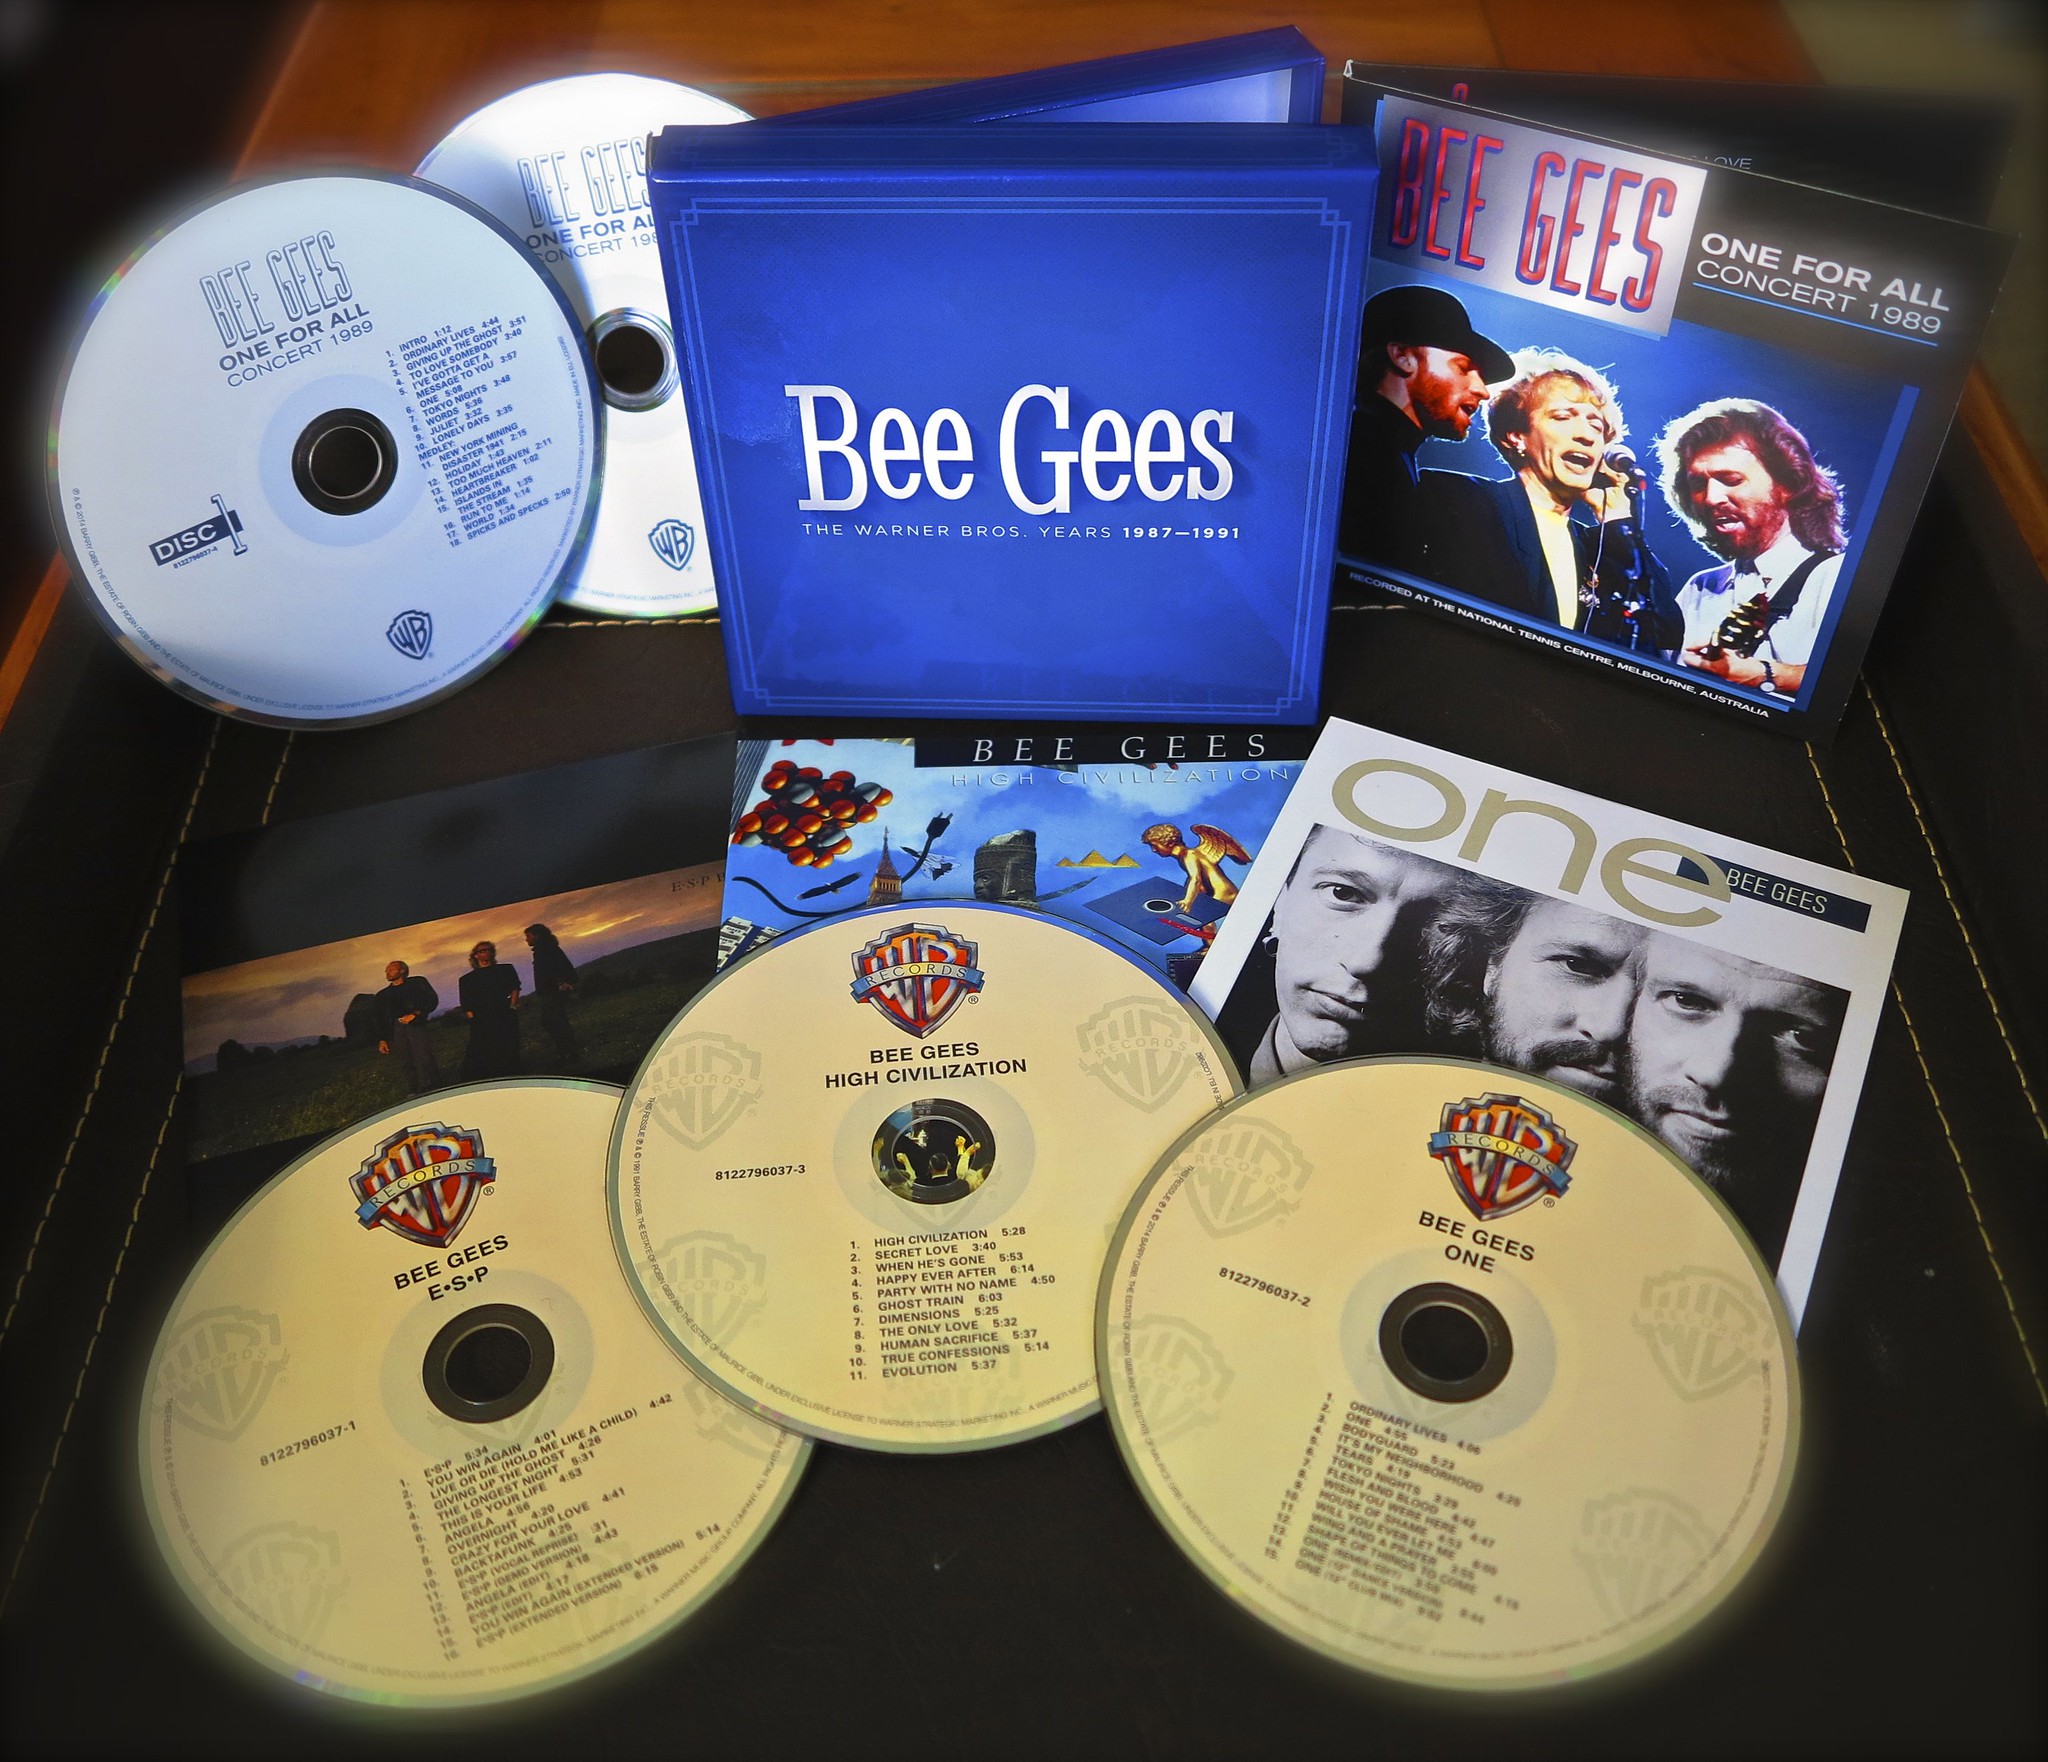 <p>To make matters worse, Barry Gibb had to live with the fact that he’d argued with his brother shortly before his passing. To help deal with all these feelings, the Bee Gees recorded an album in memory of their lost brother. This was simply called <em>One.</em> They also covered his song “(Our Love) Don’t Throw It All Away” and the title took on a whole new and tragic meaning. </p>  <p>Additionally, <strong>there was someone else feeling a complicated loss. </strong>Someone Gibb had almost completely forgotten about. </p>